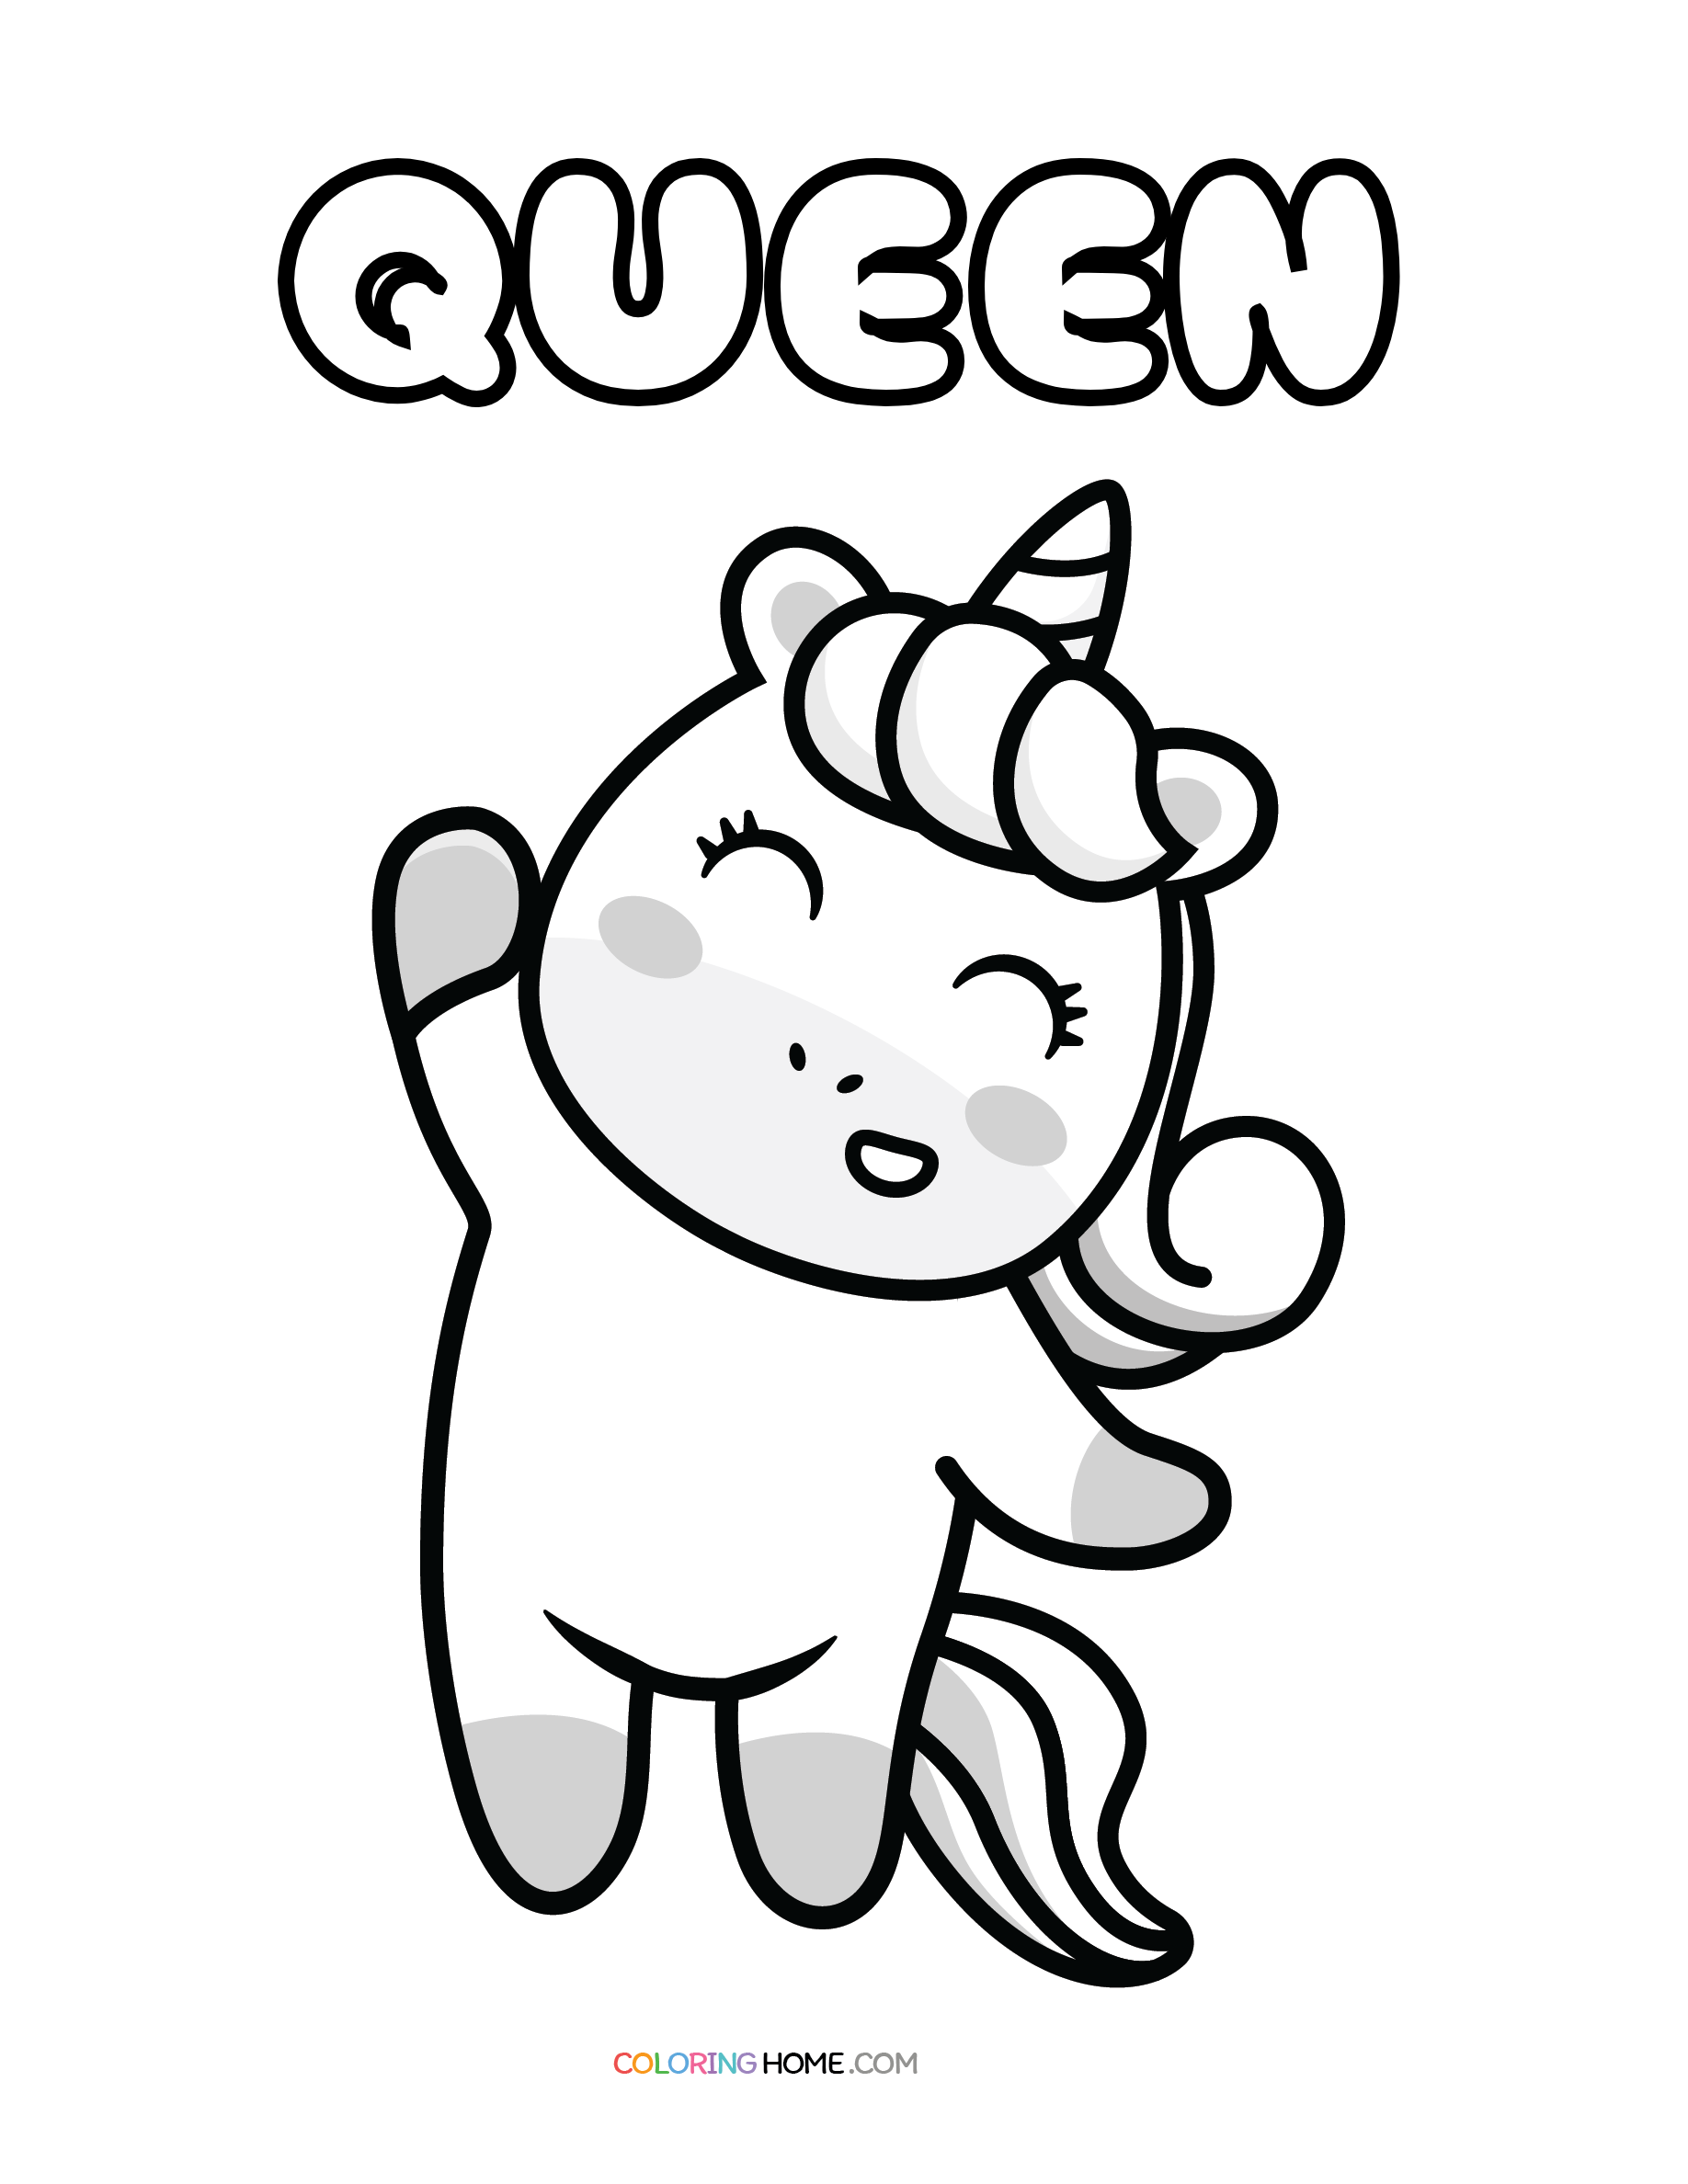 Queen unicorn coloring page